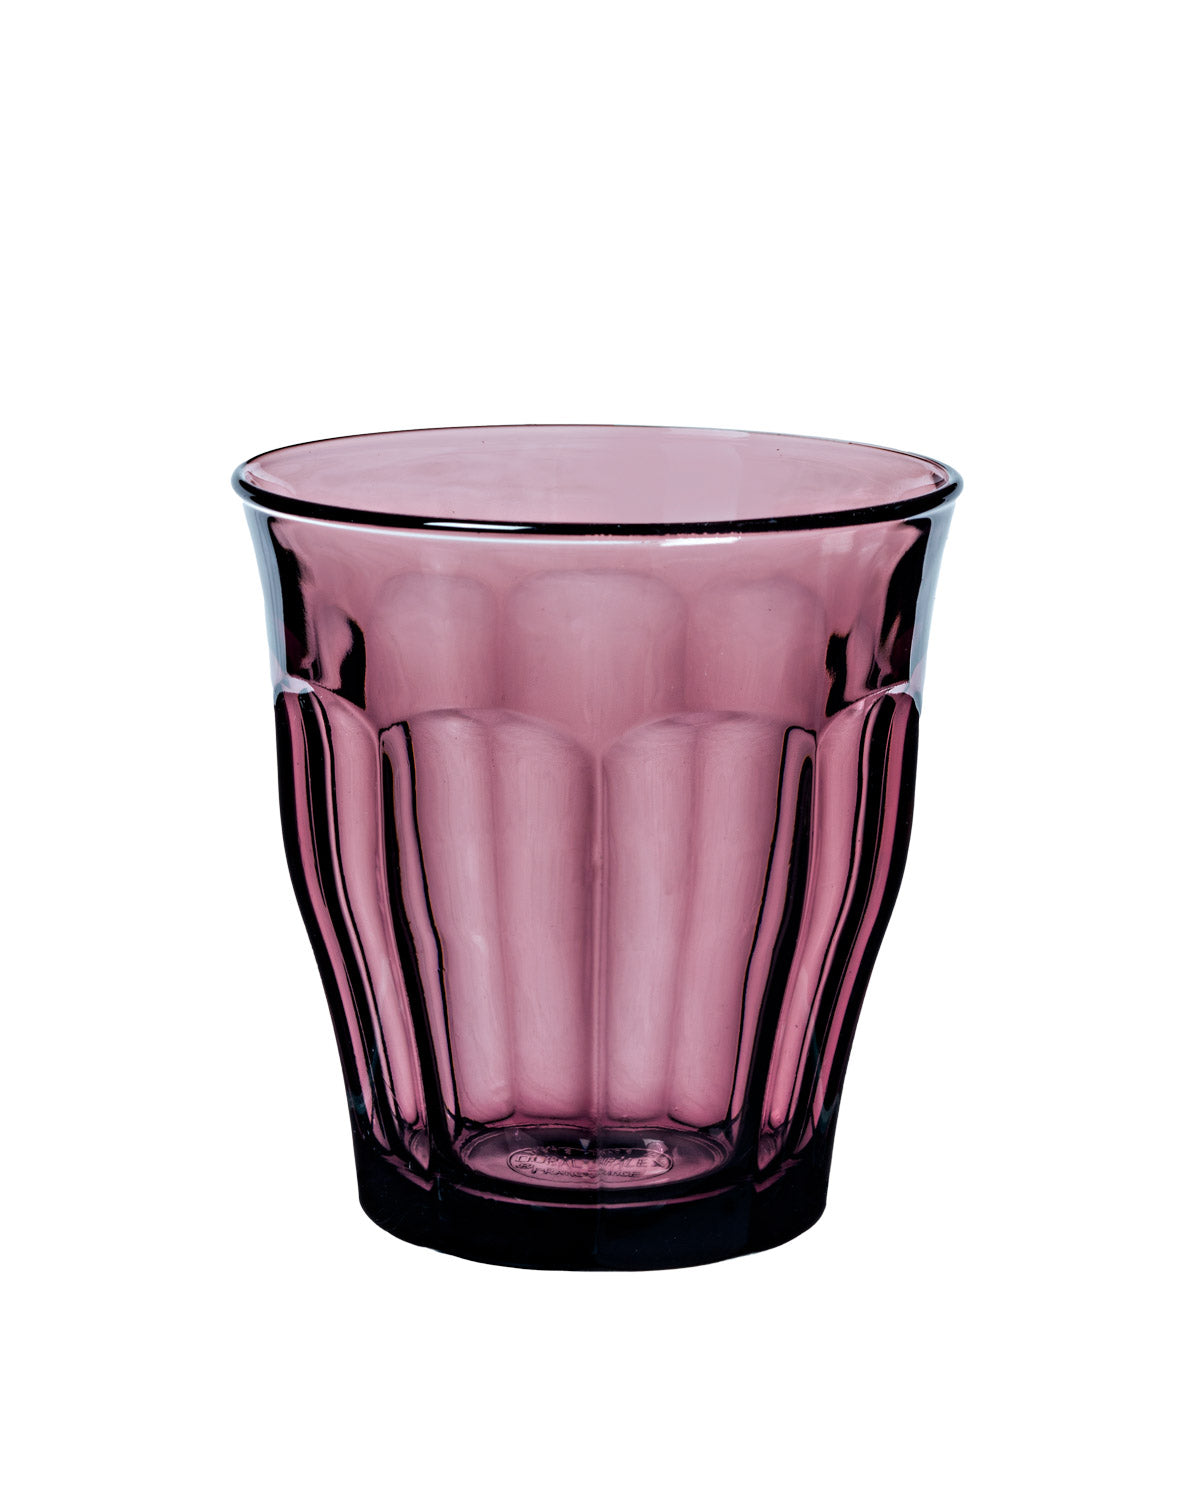 | of In Tumbler USA France 8.38oz, 4 Duralex Picardie® Plum Le | Set Made